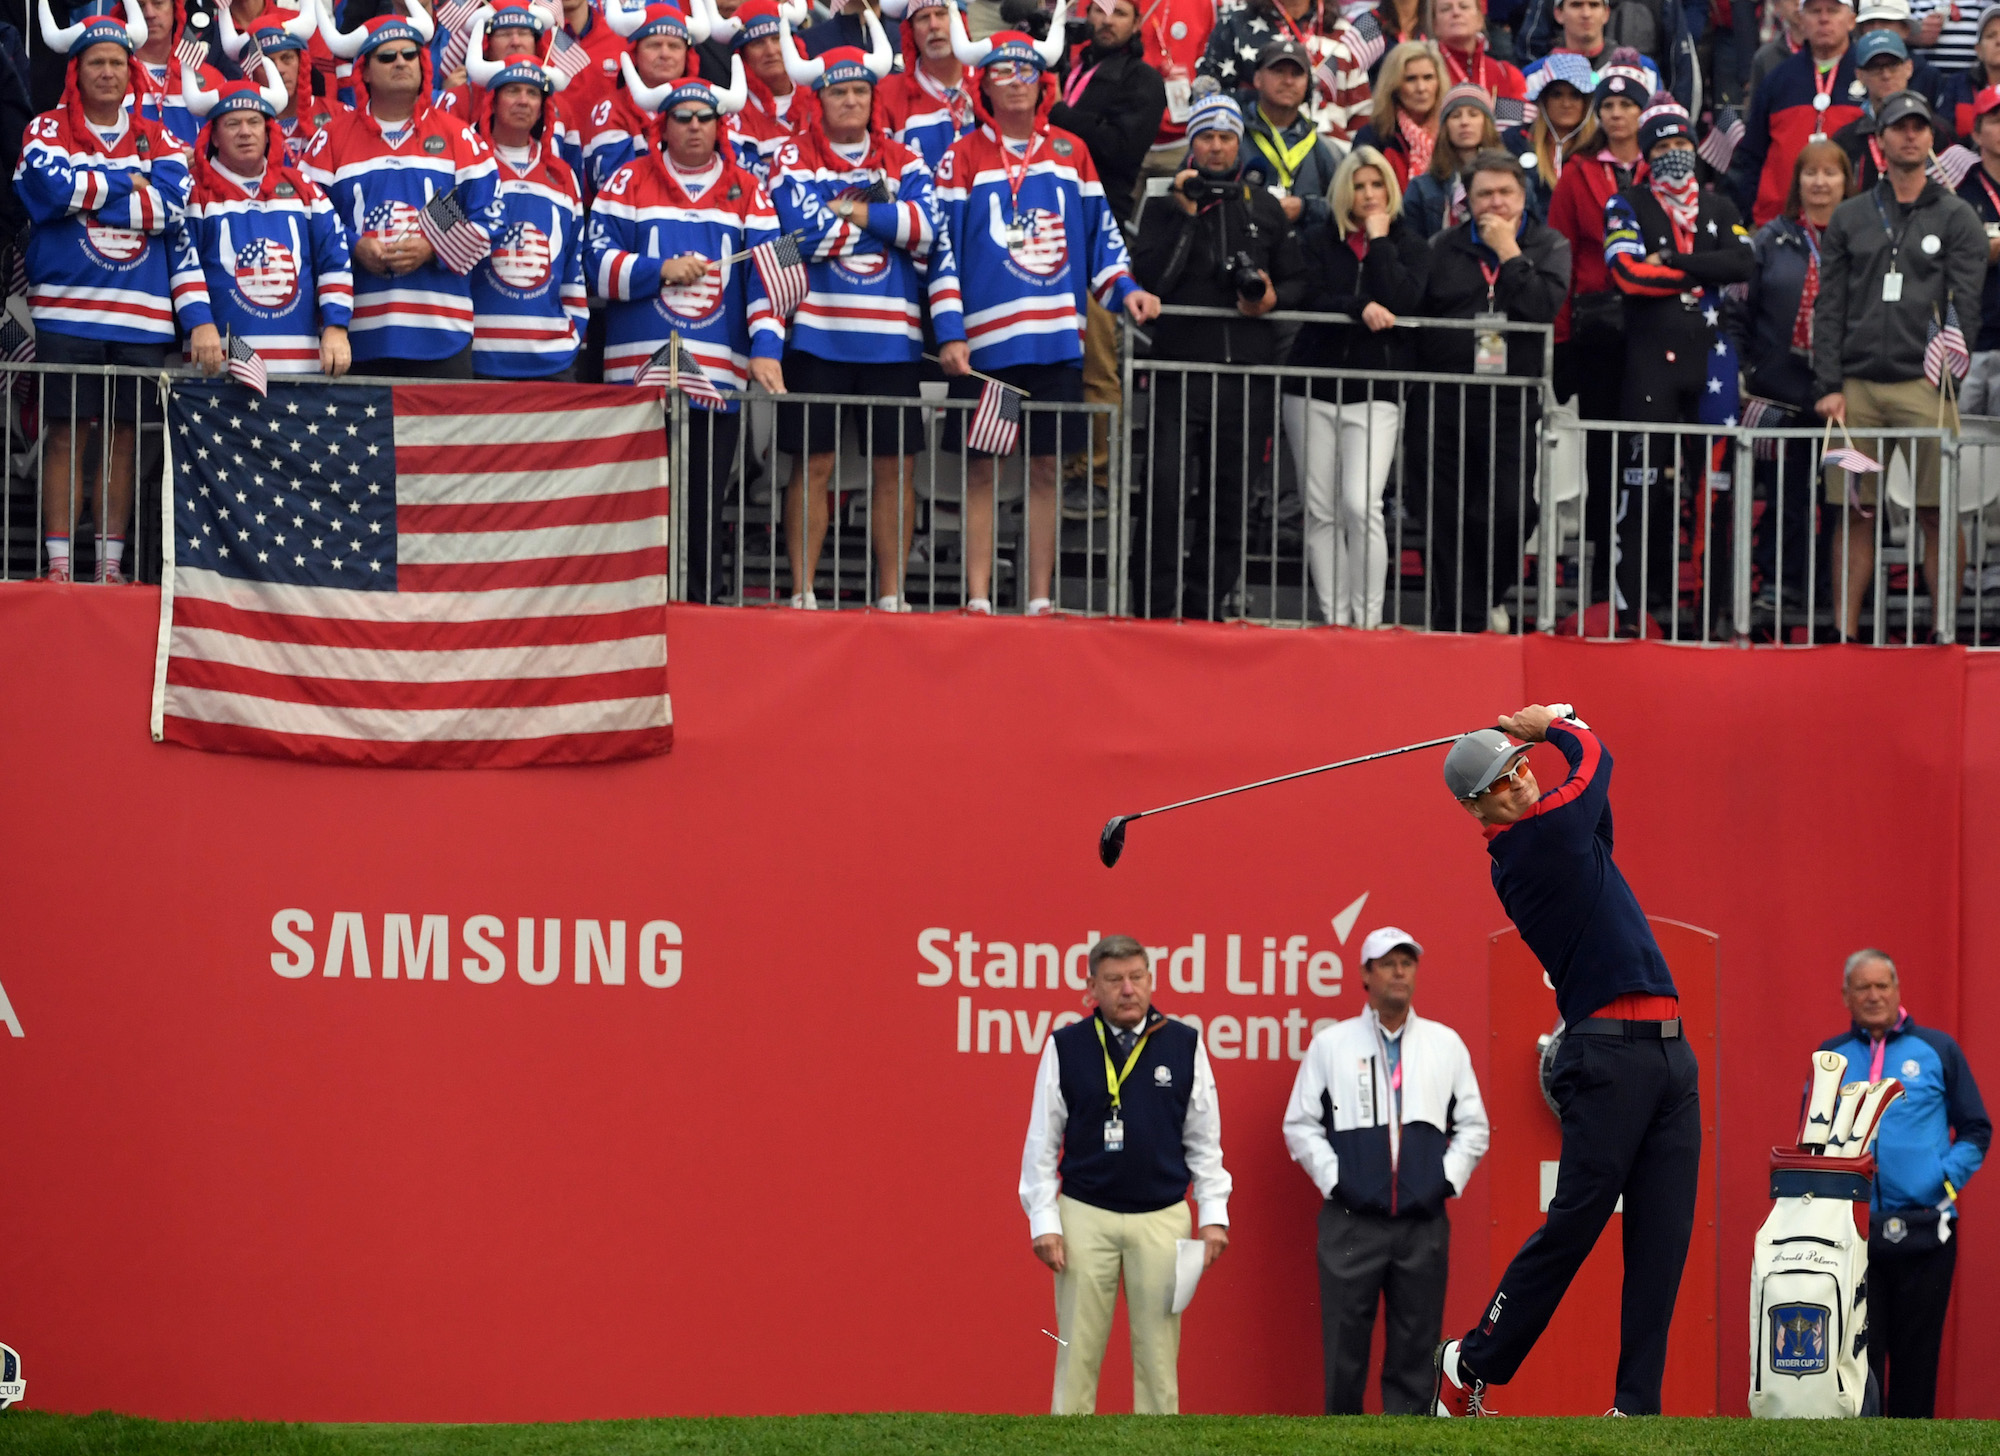 Sep 30, 2016; Chaska, MN, USA; Zach Johnson of the United States plays his shot from the first tee in the morning foursome matches during the 41st Ryder Cup at Hazeltine National Golf Club. Mandatory Credit: Michael Madrid-USA TODAY Sports